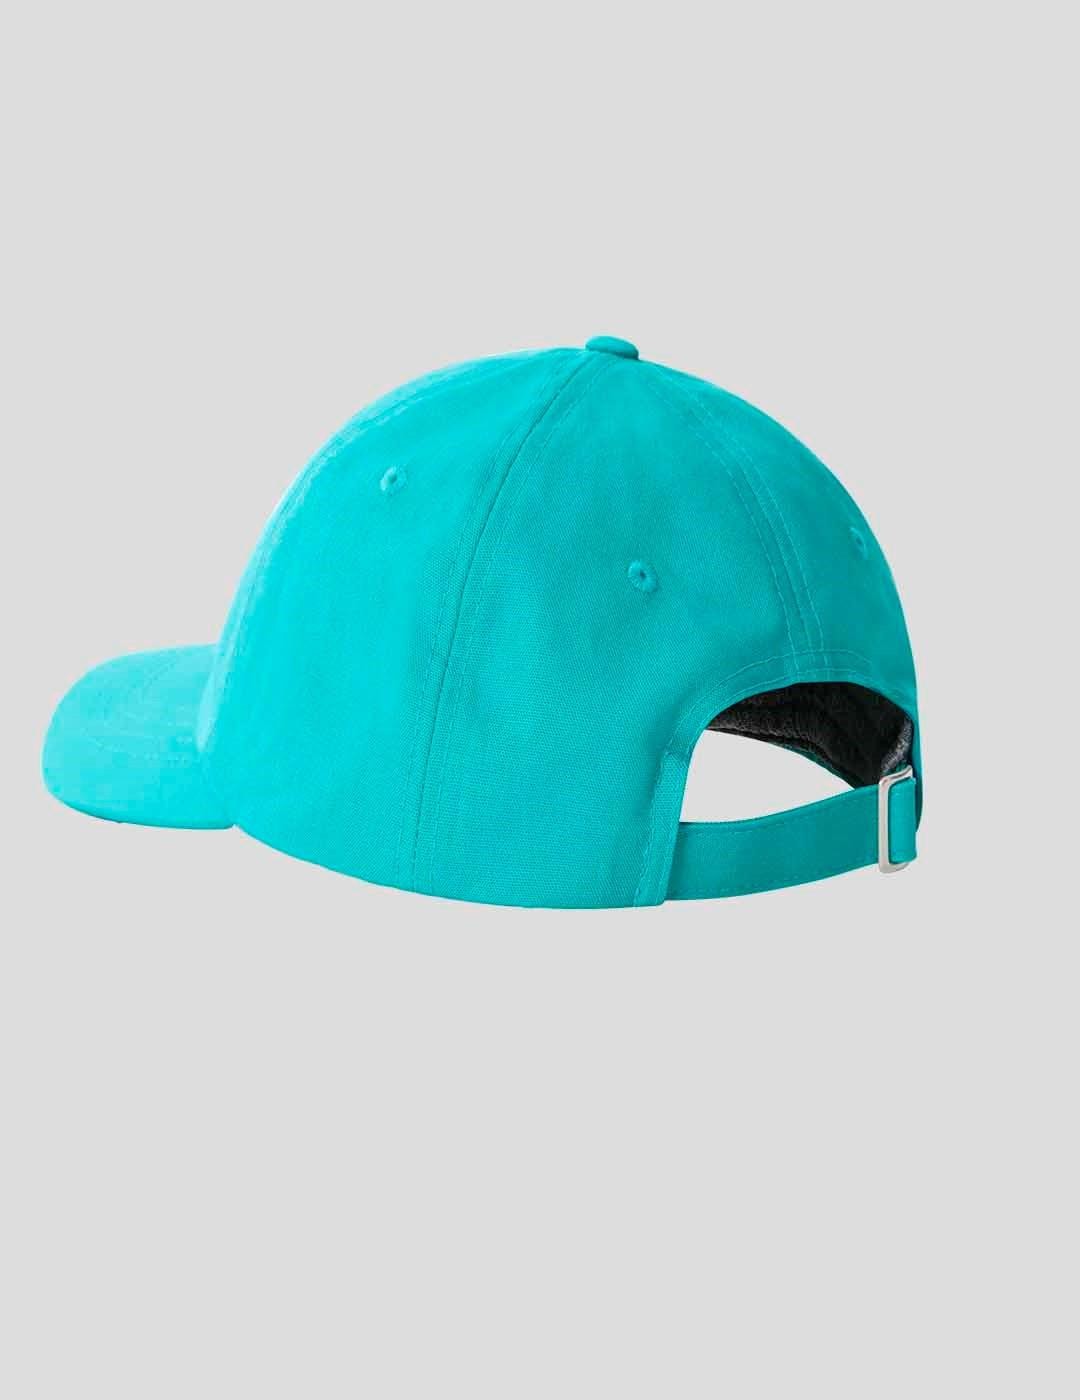 GORRA THE NORTH FACE NORM HAT  PORCELAIN GREEN